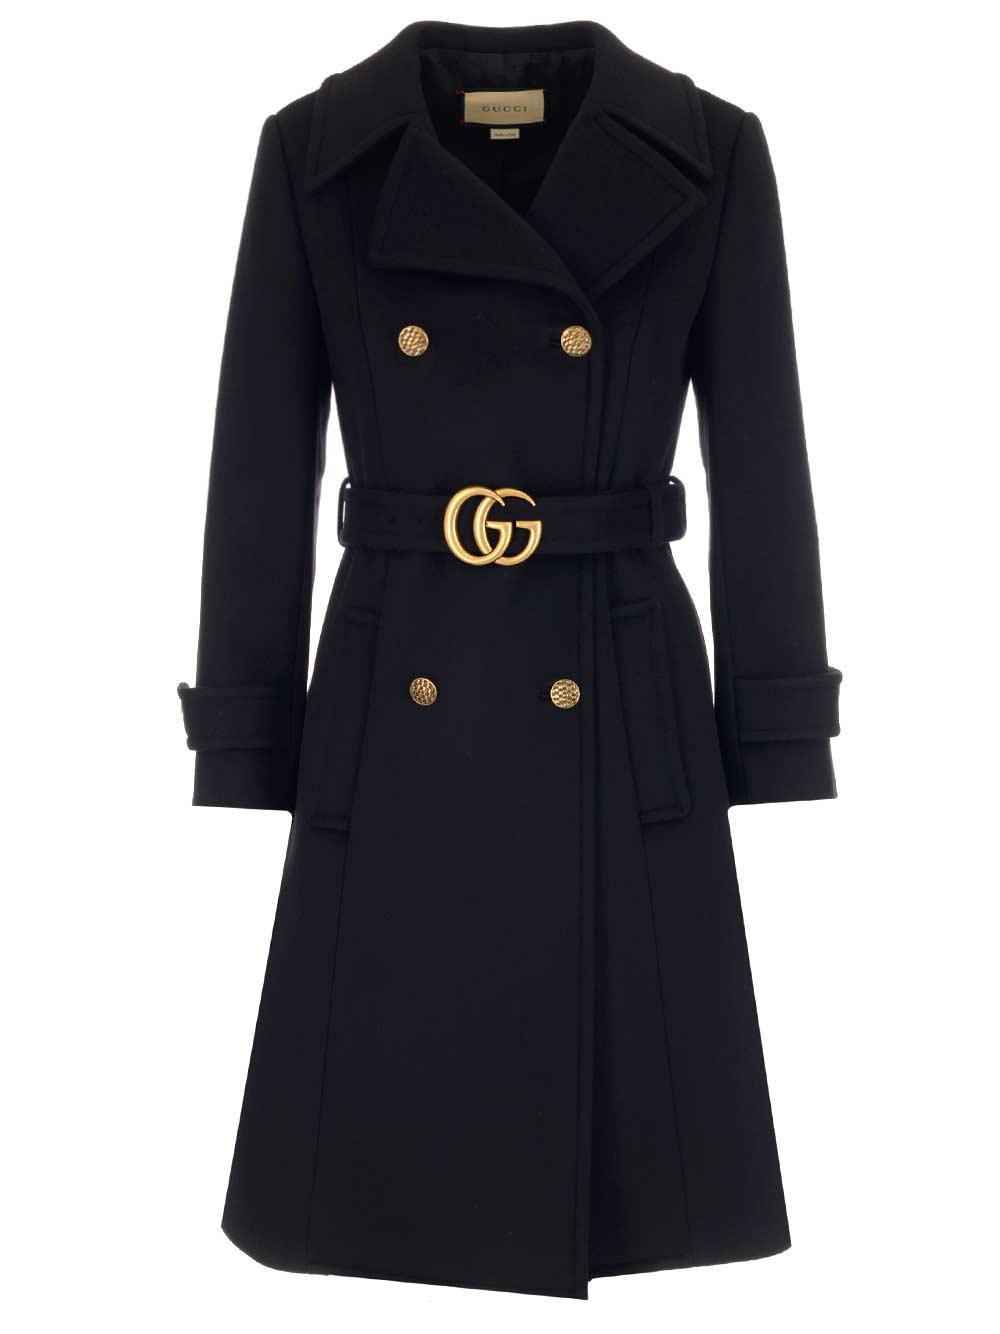 Gucci Double G Belted Coat in Black | Lyst UK